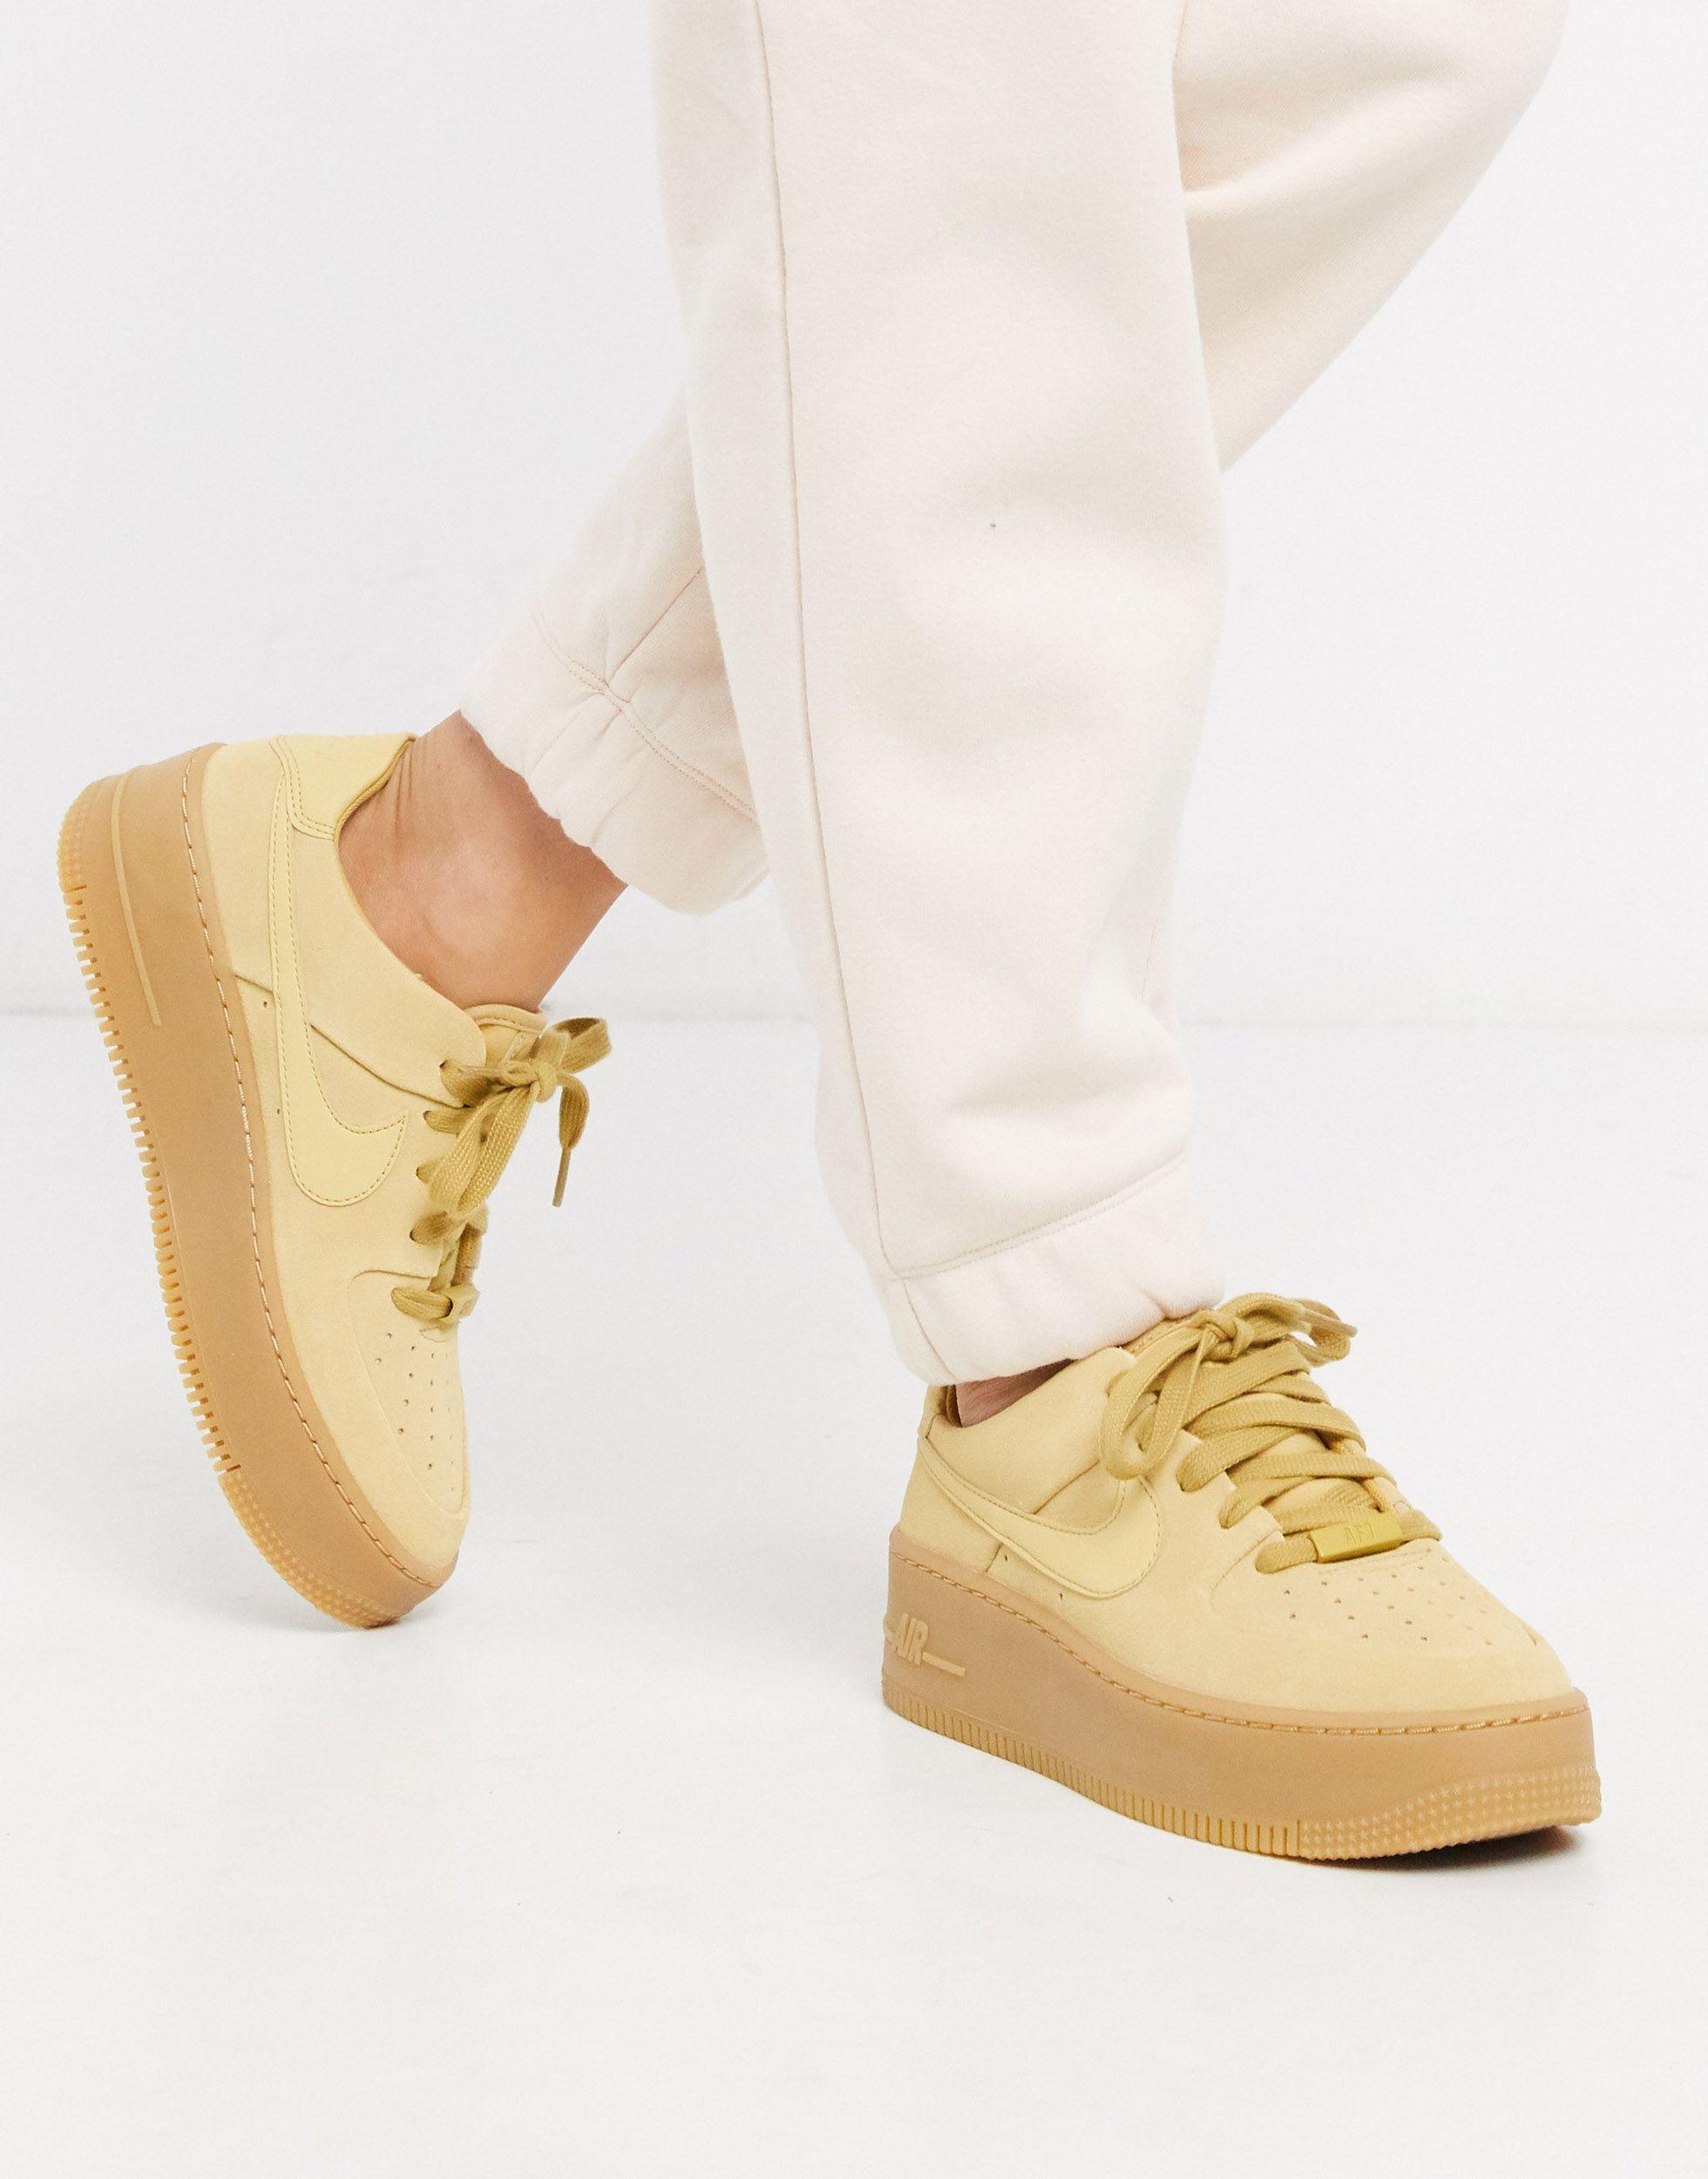 Nike Beige With Gum Sole Air Force 1 Sage Sneakers-cream in Natural | Lyst  UK